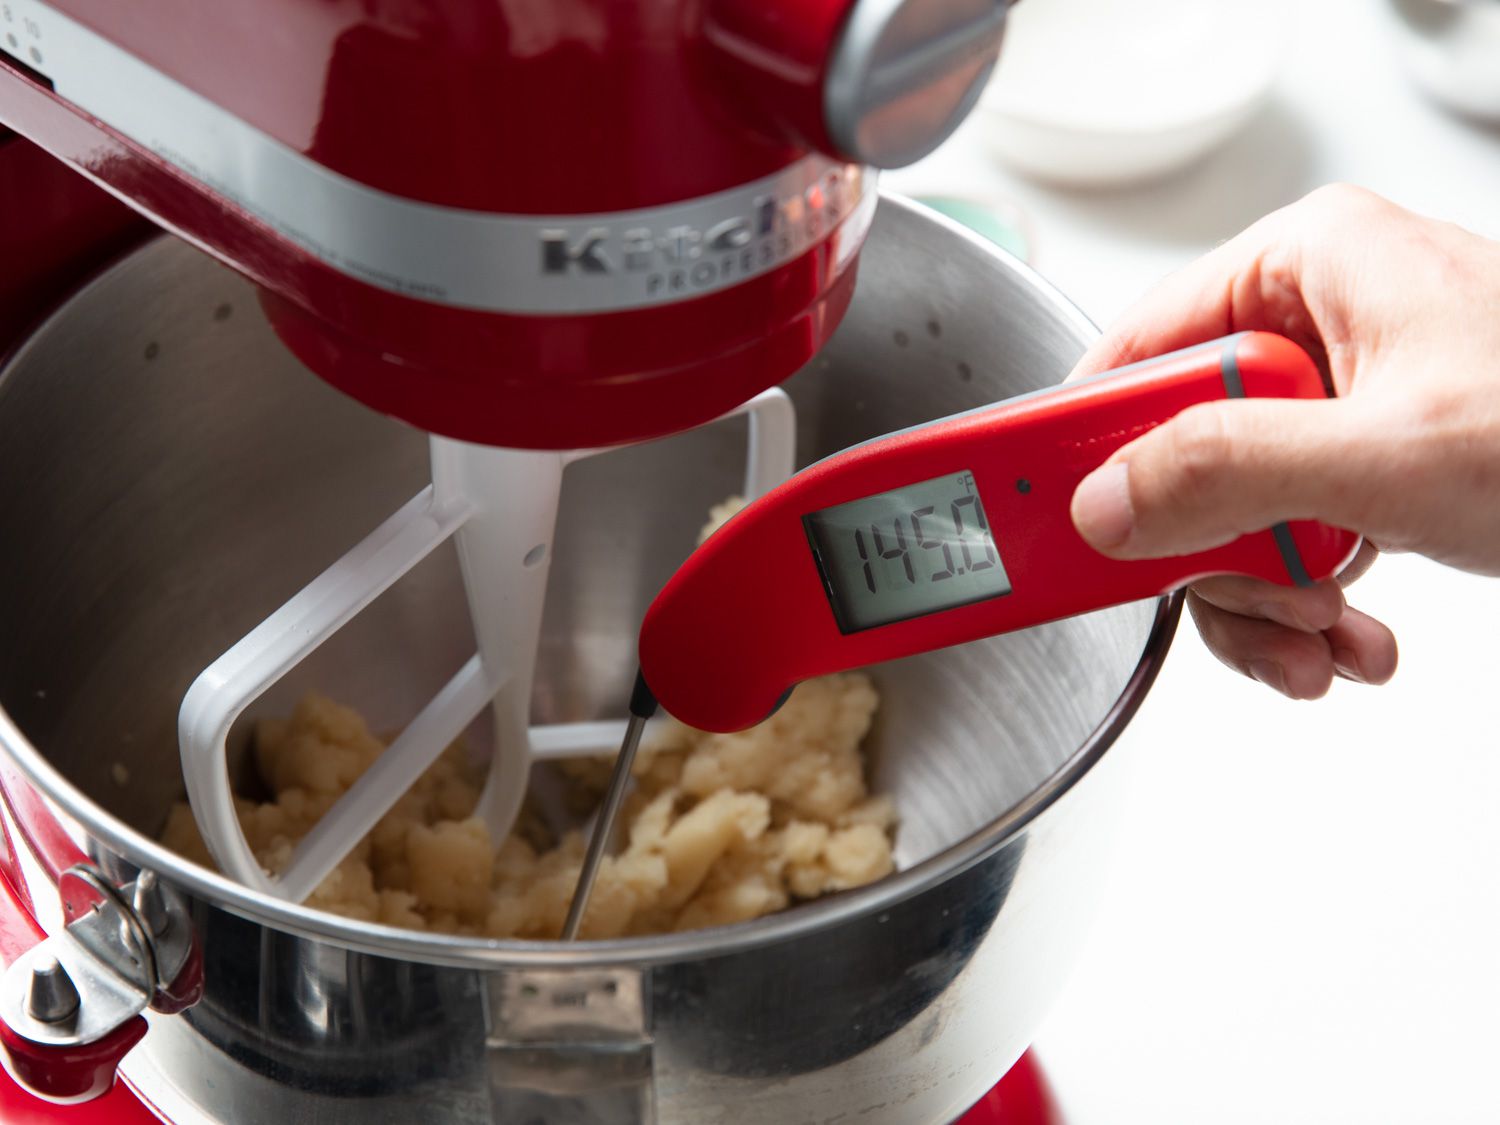 The paste is in the bowl of a stand mixer and registering 145 degree Fahrenheit (63 degrees C) on a thermometer.